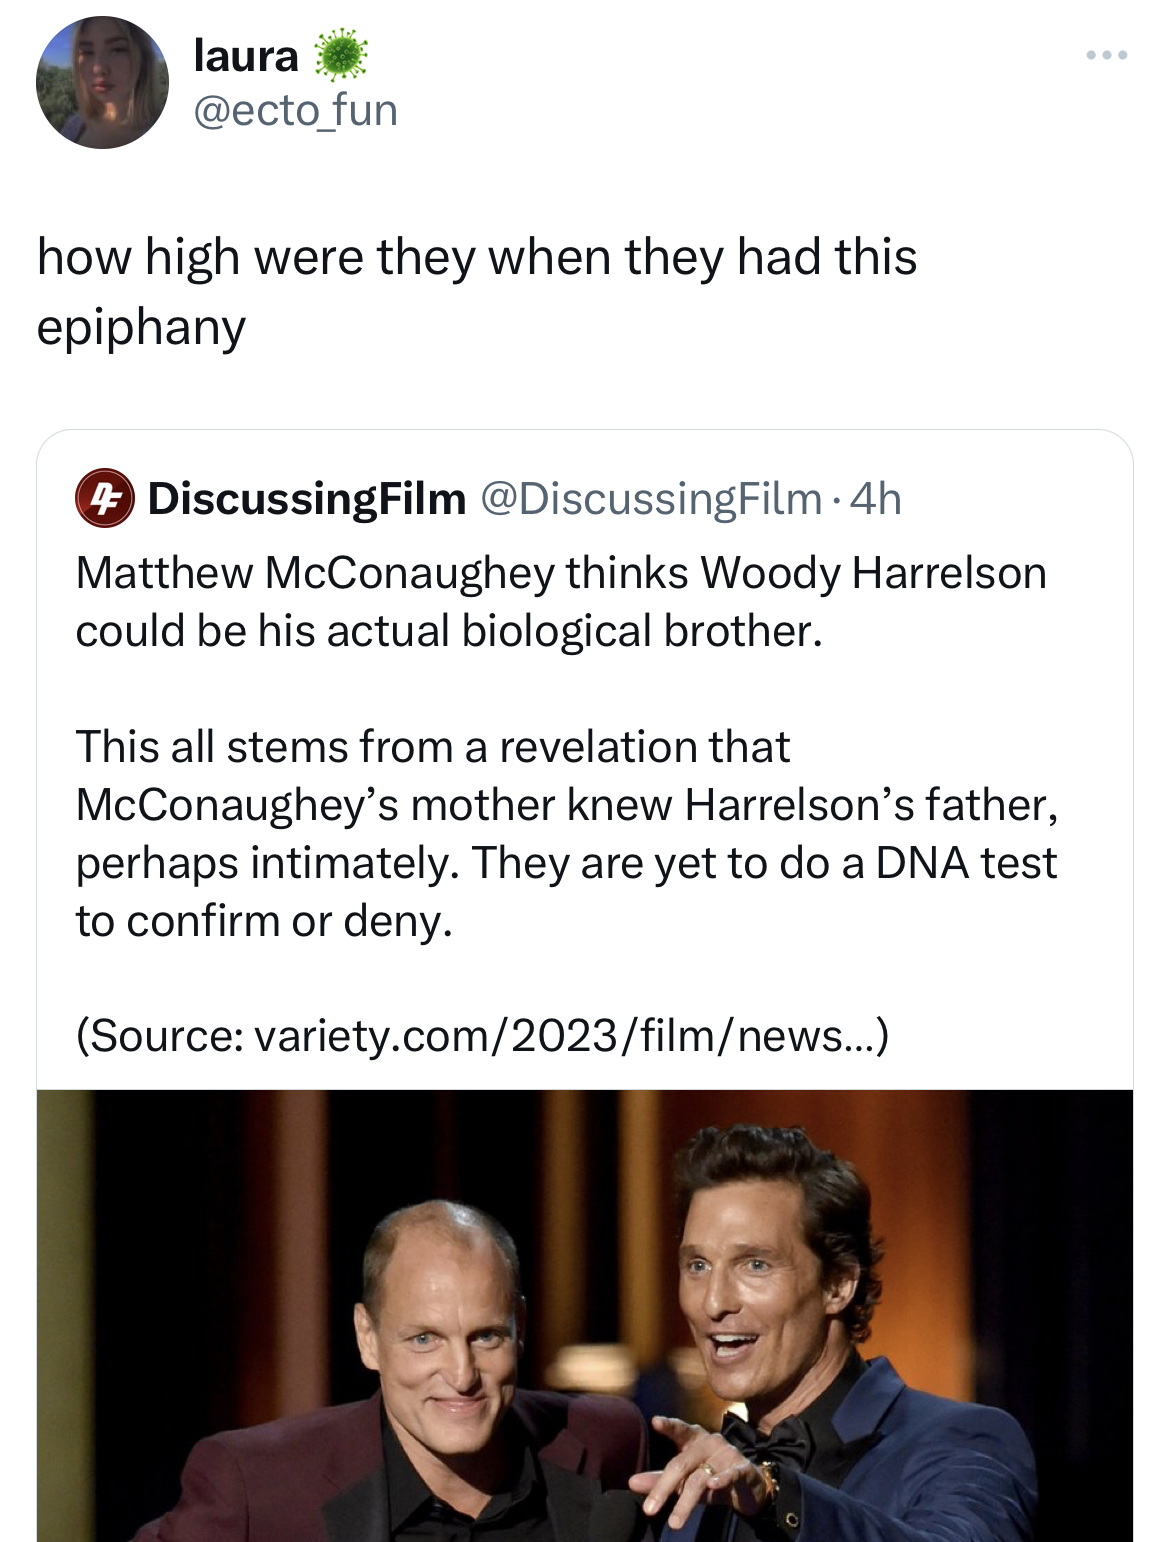 savage tweets - woody harrelson twin - laura how high were they when they had this epiphany DiscussingFilm 4h Matthew McConaughey thinks Woody Harrelson could be his actual biological brother. This all stems from a revelation that McConaughey's mother kne